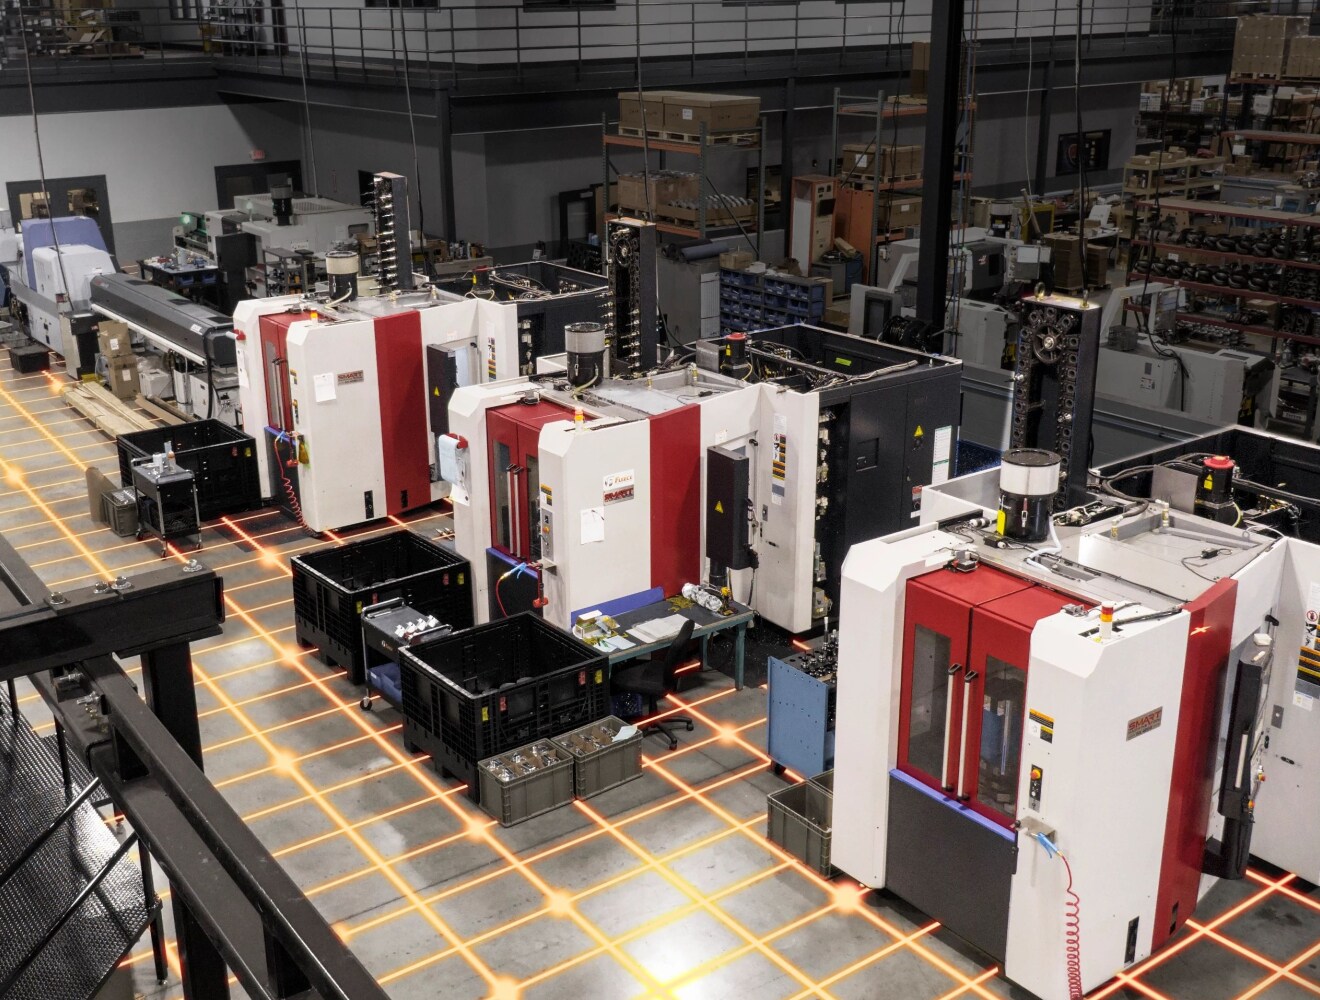 Image showing a production floor with various CNC machines.